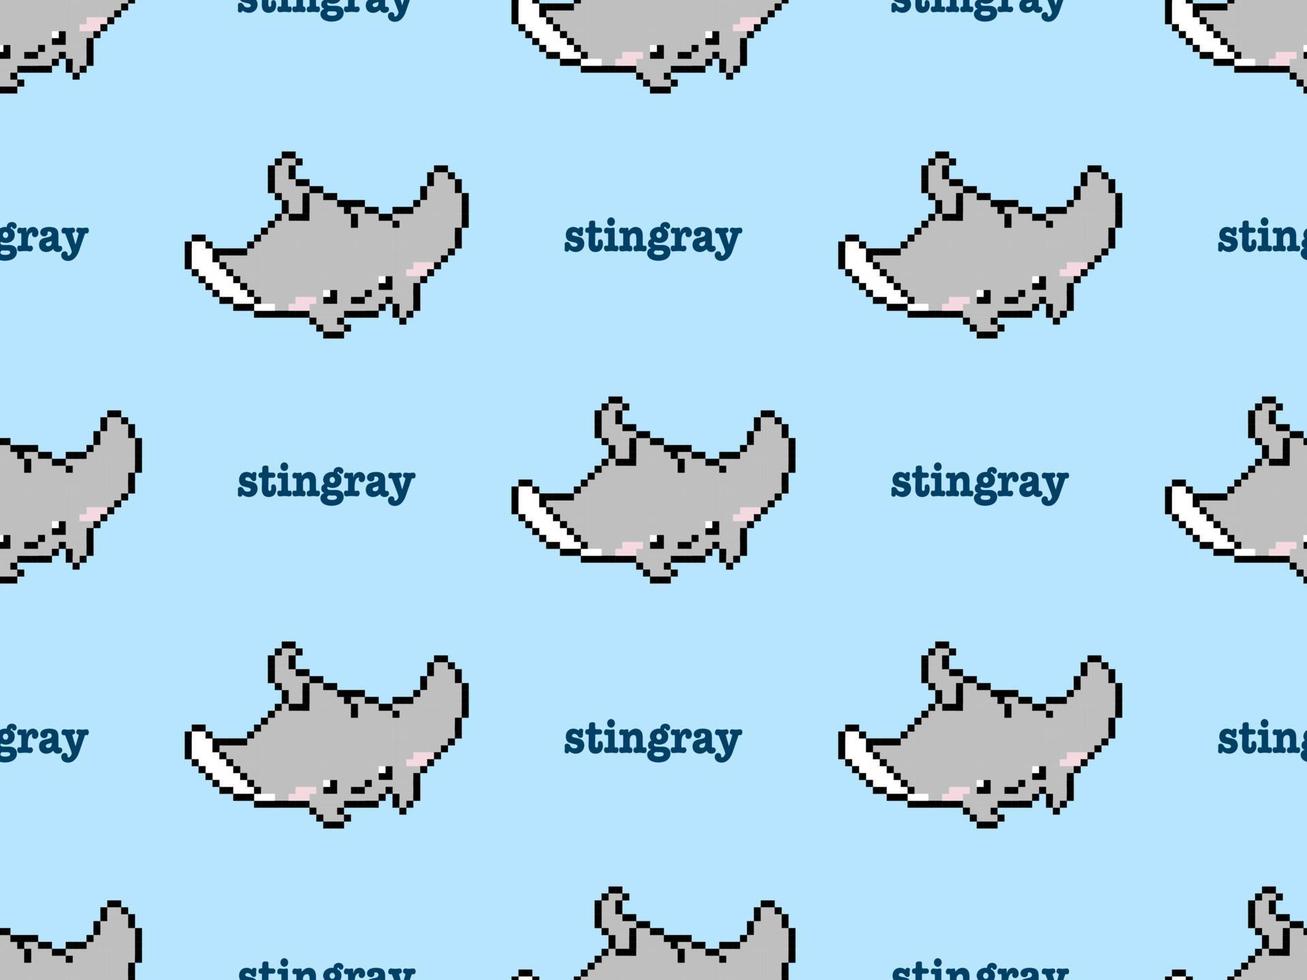 Stingray cartoon character seamless pattern on blue background.Pixel style vector